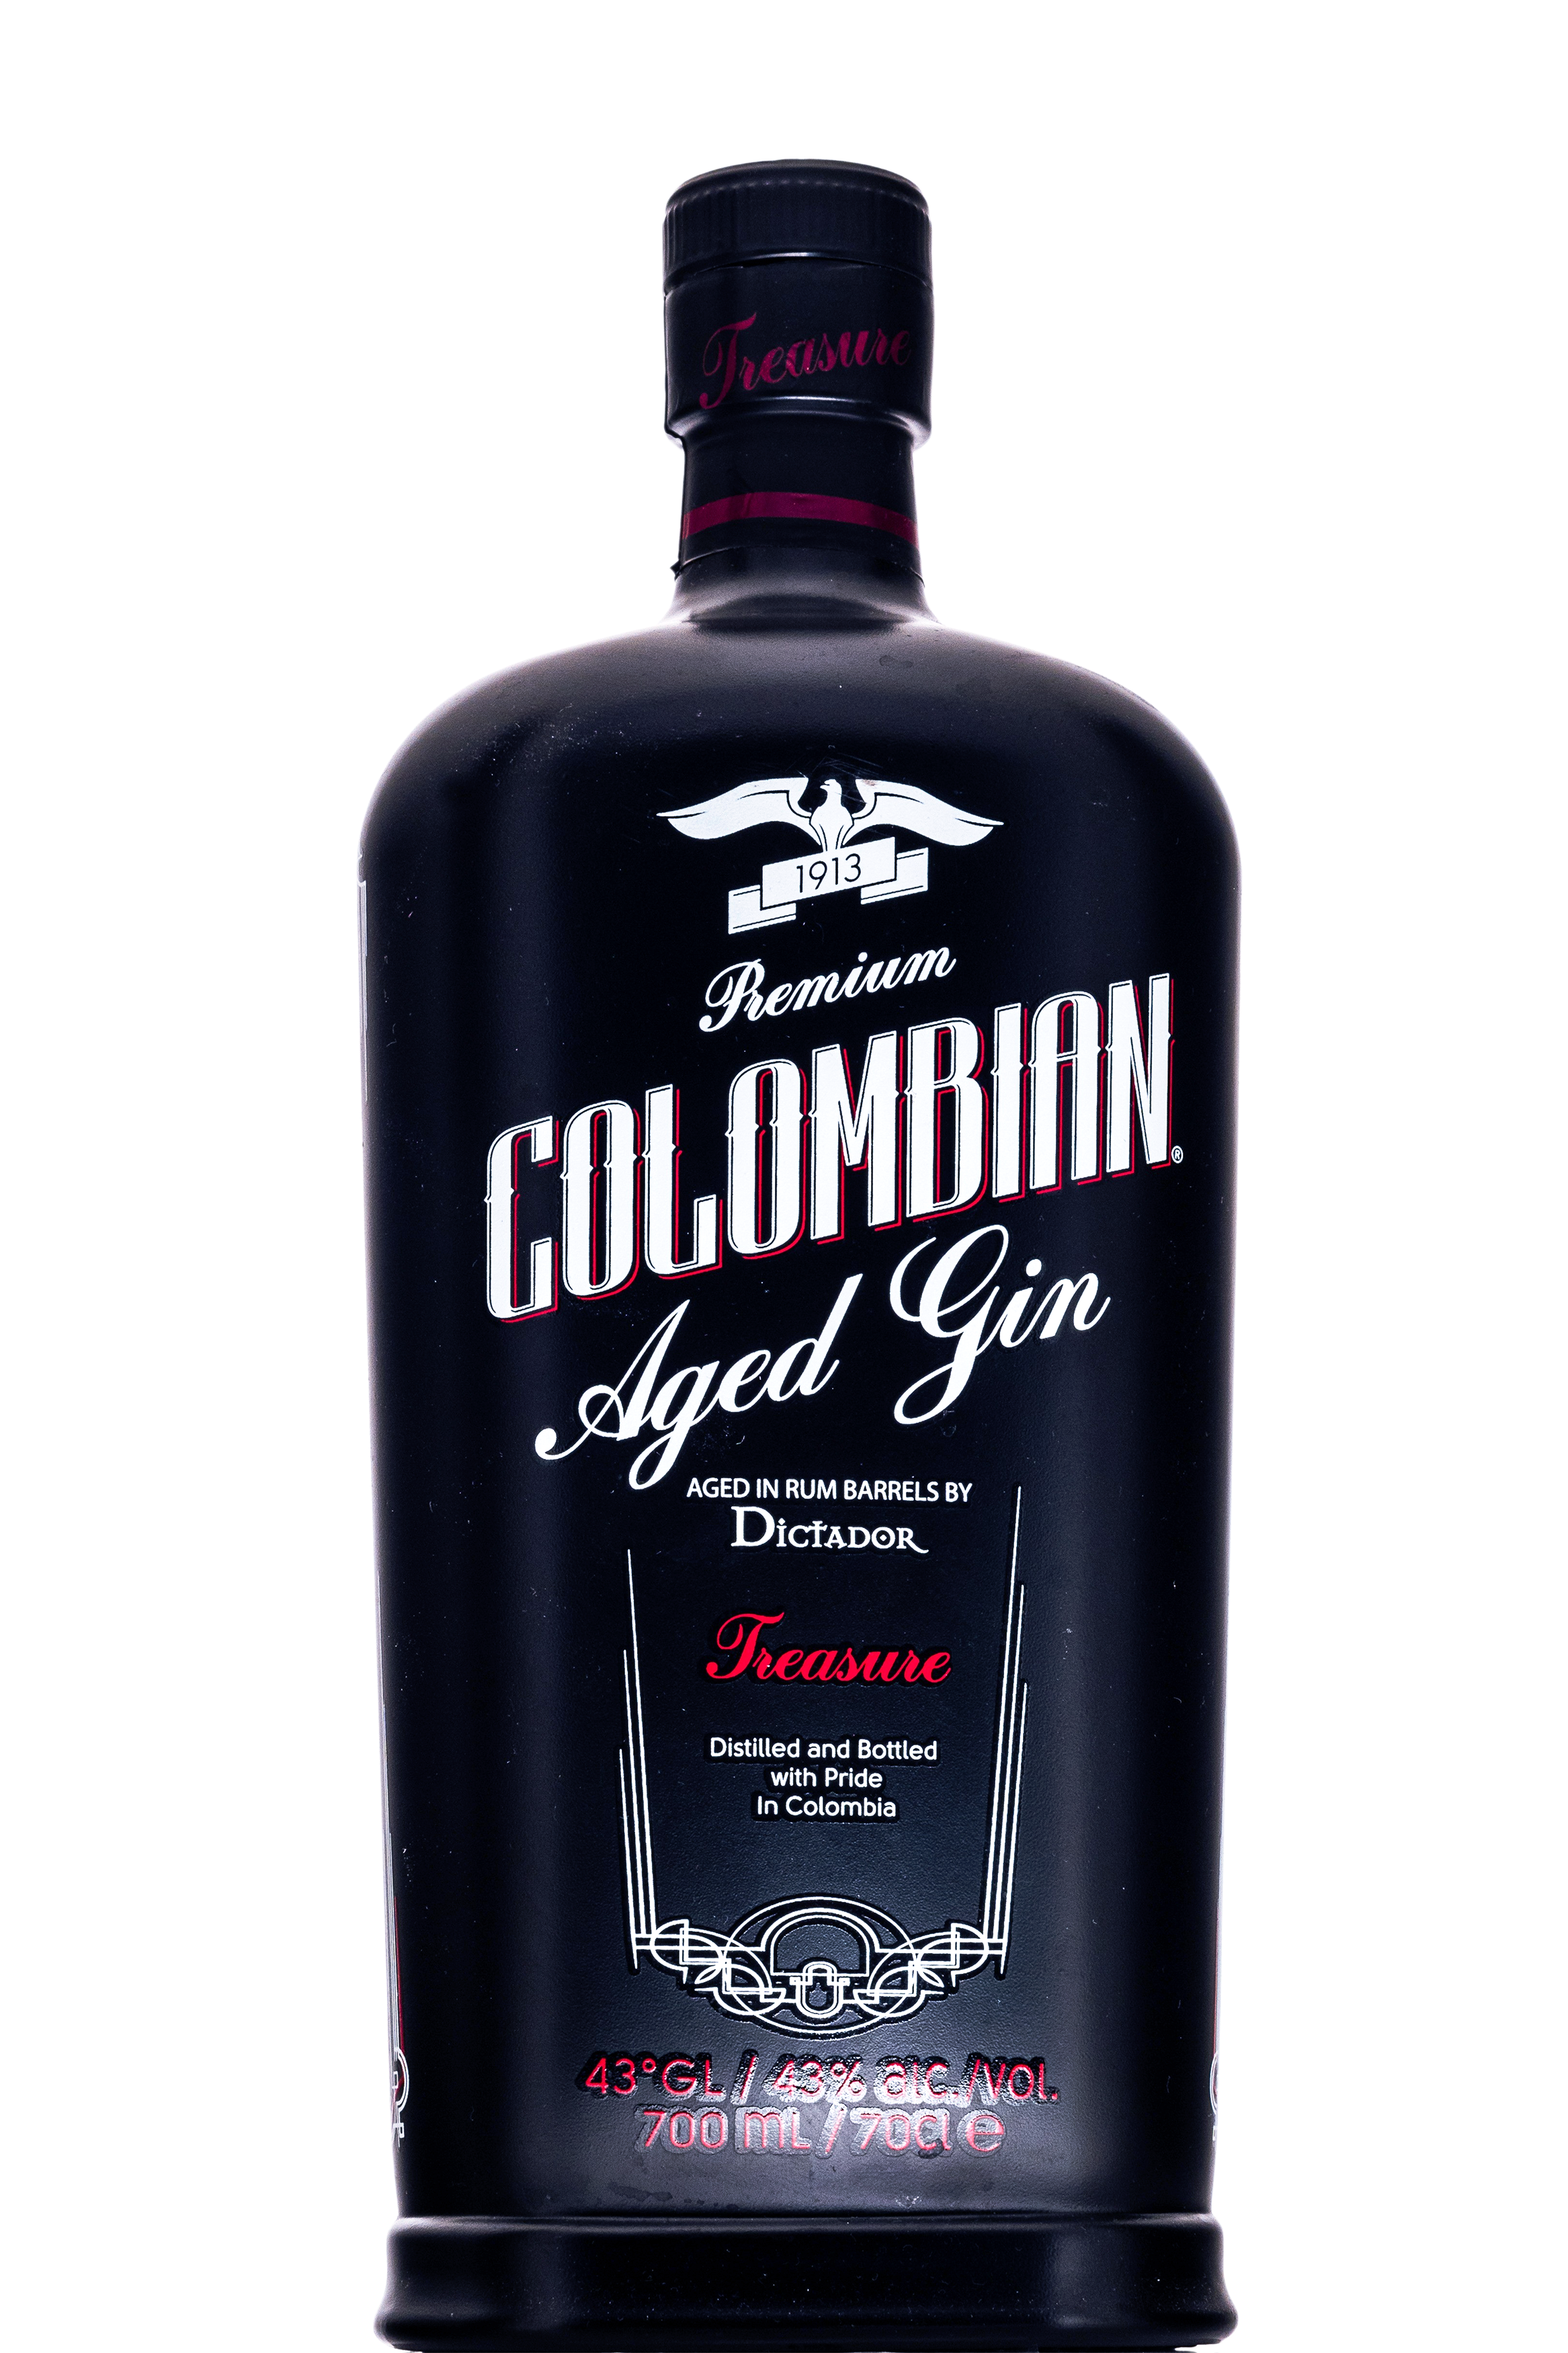 colombian-aged-gin-700ml.png